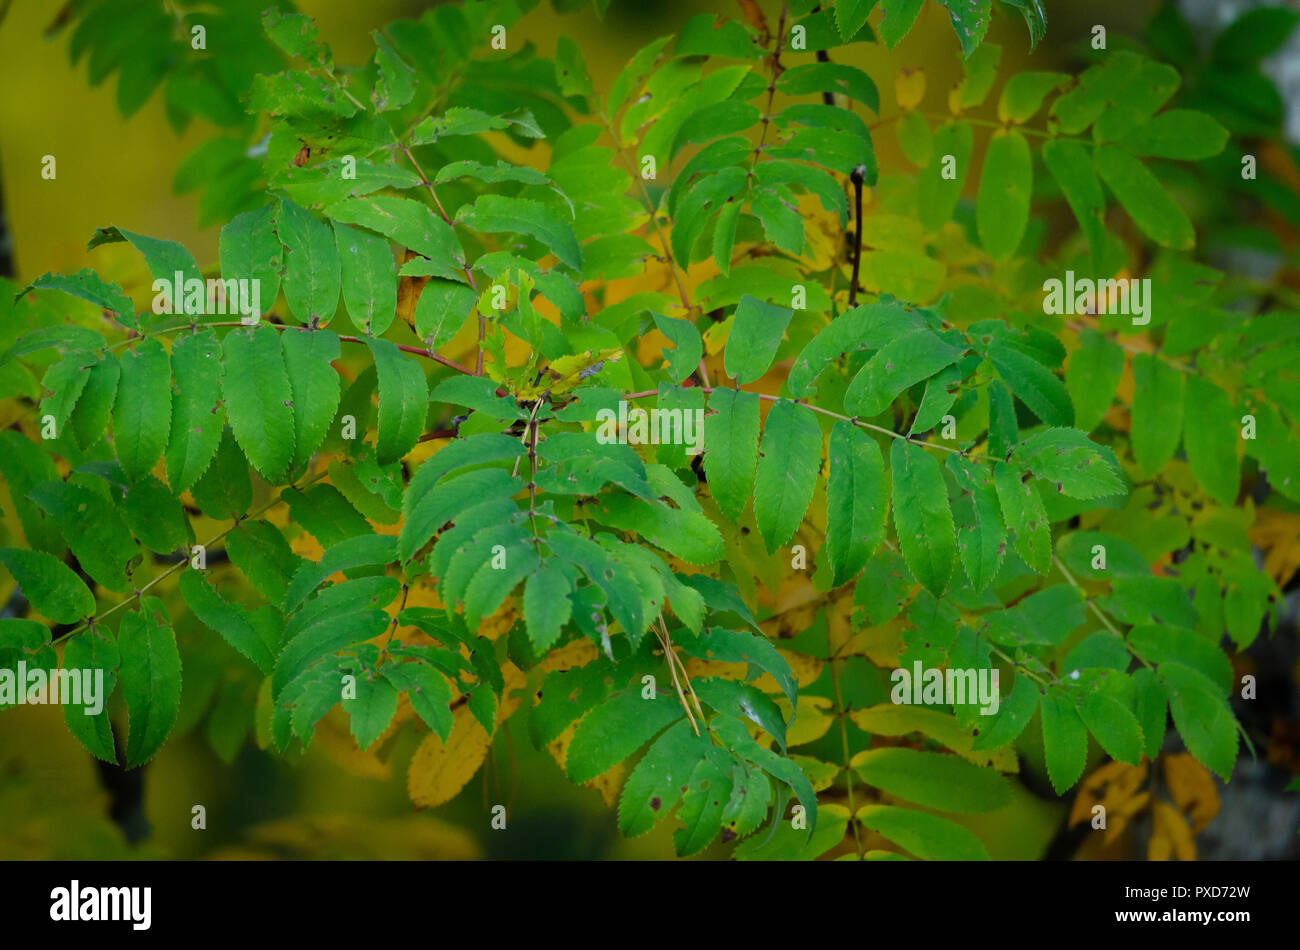 A bunch of saturated leaves with a hazy, yellow background Stock Photo